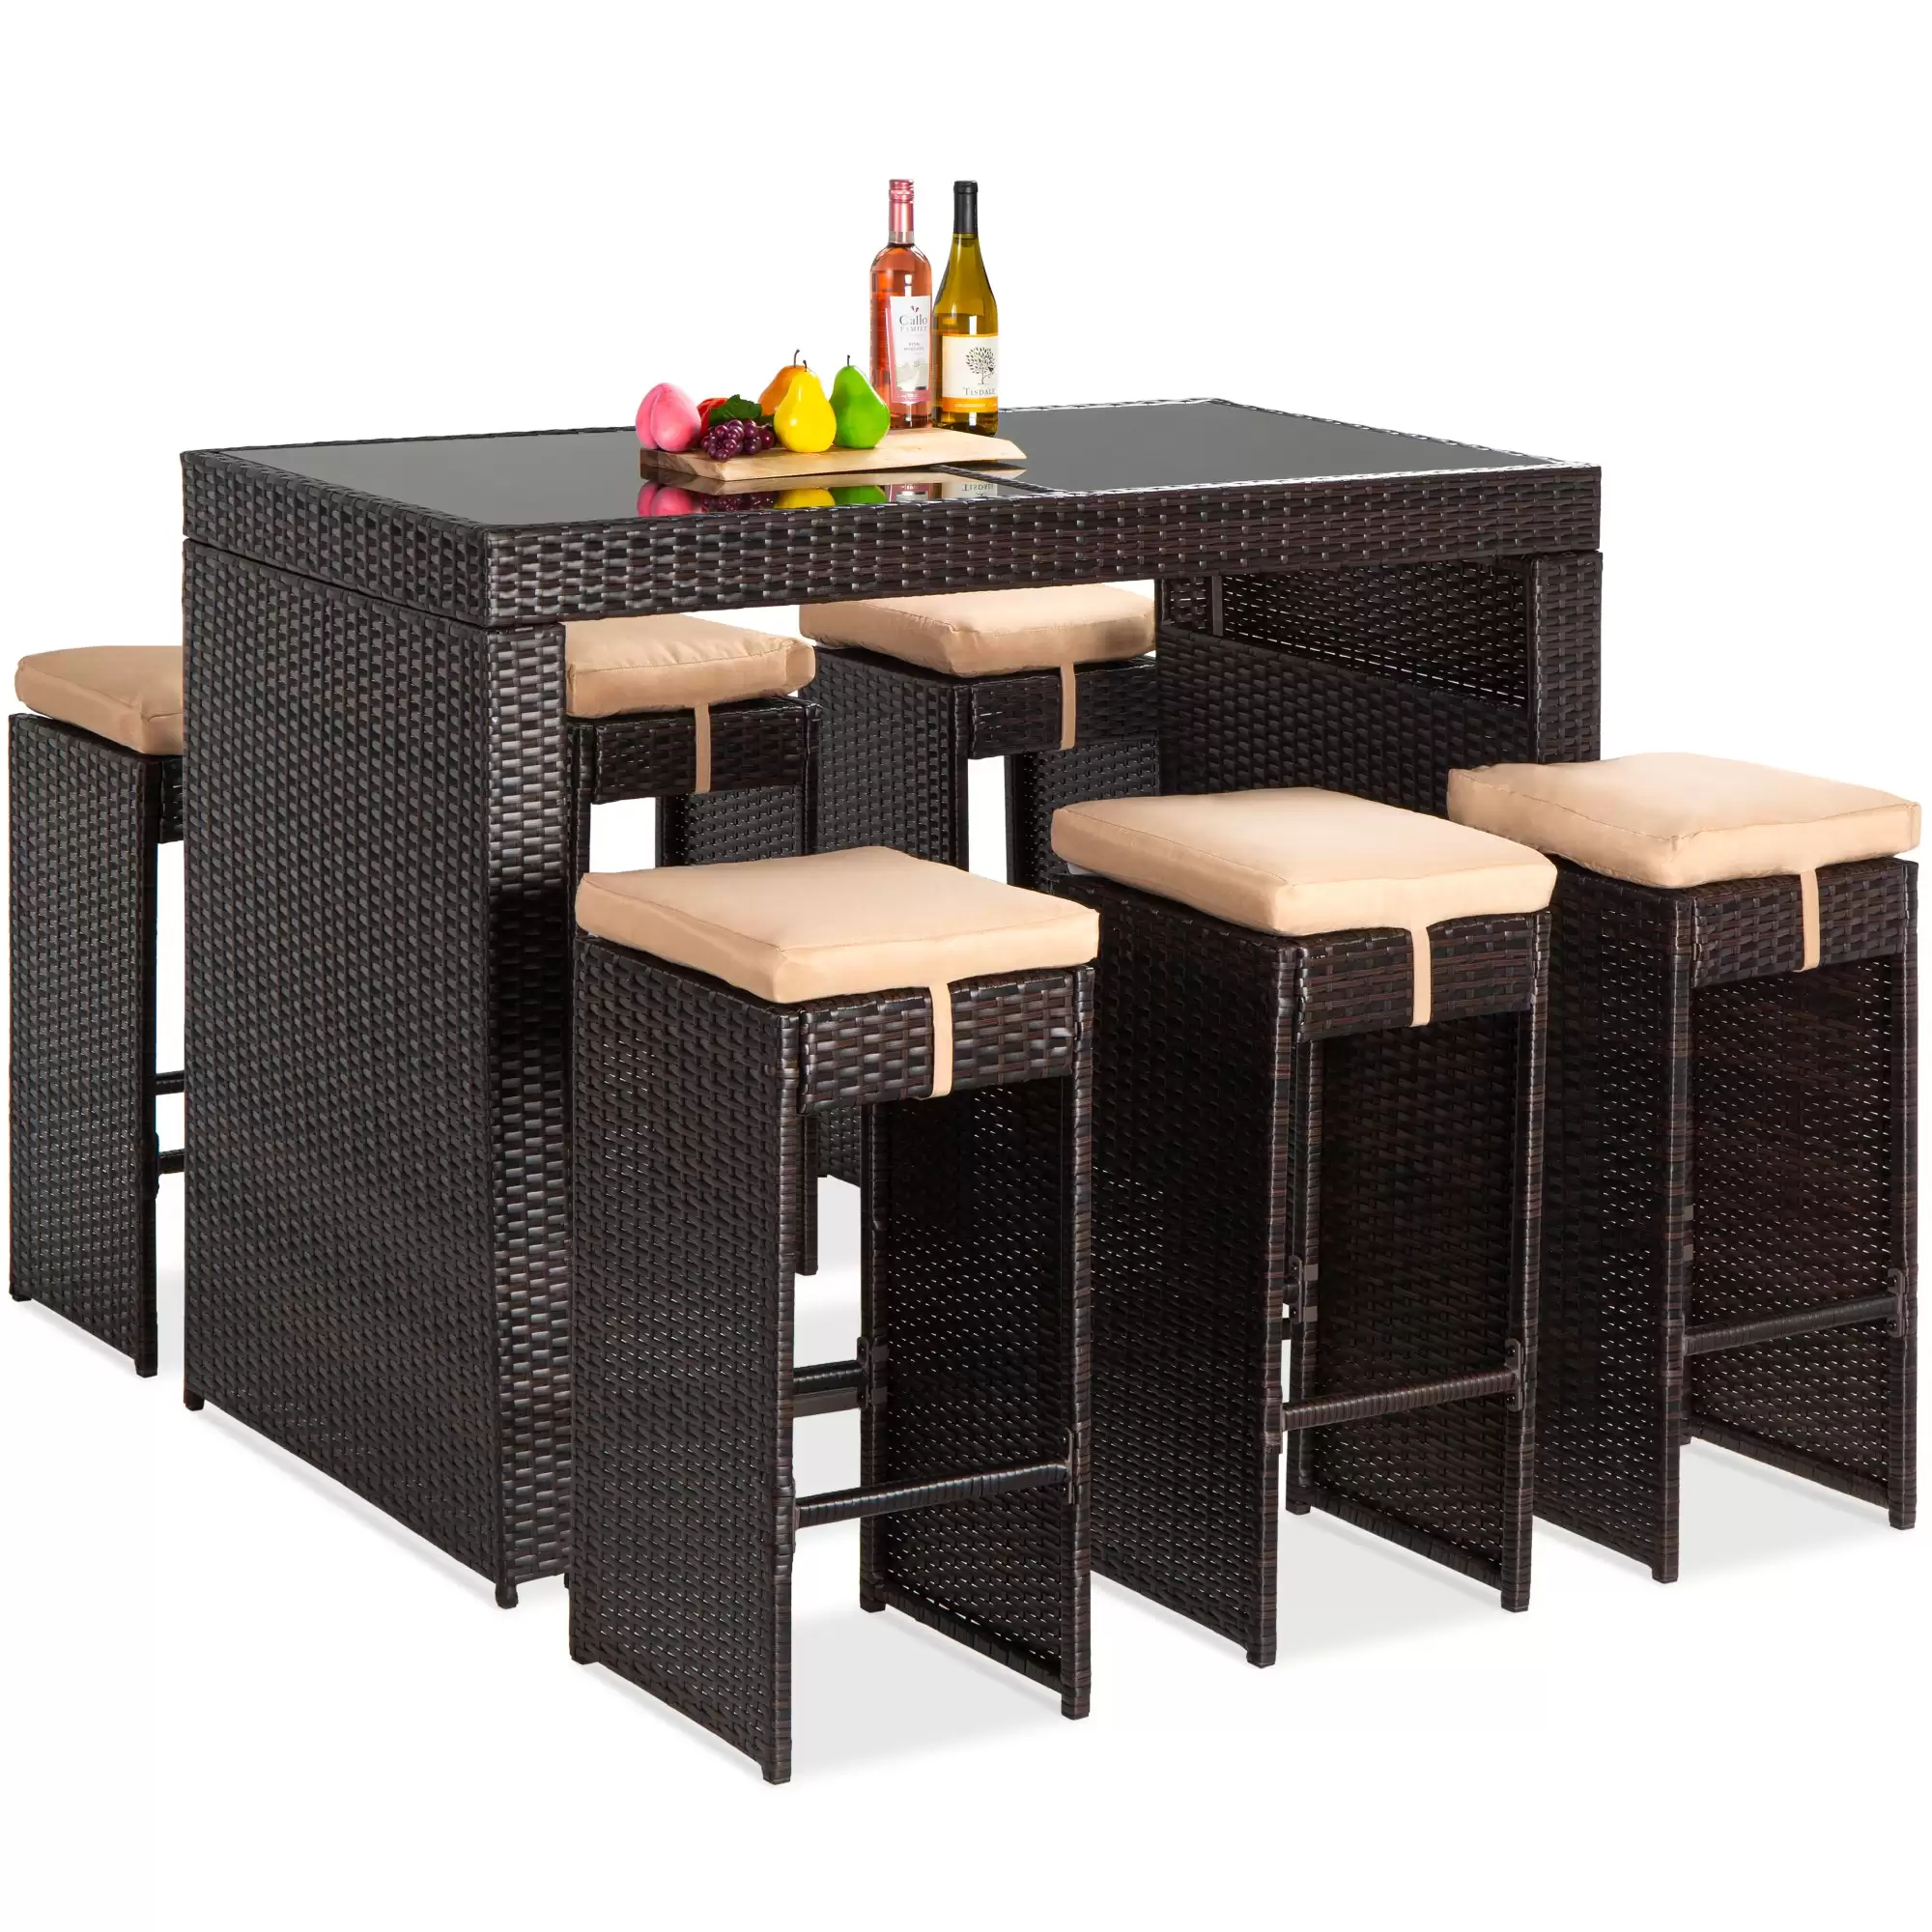 Order In Just $379.99 7-Piece Wicker Bar Patio Dining Set W/ Glass Table Top, 6 Stools At Bestchoiceproducts